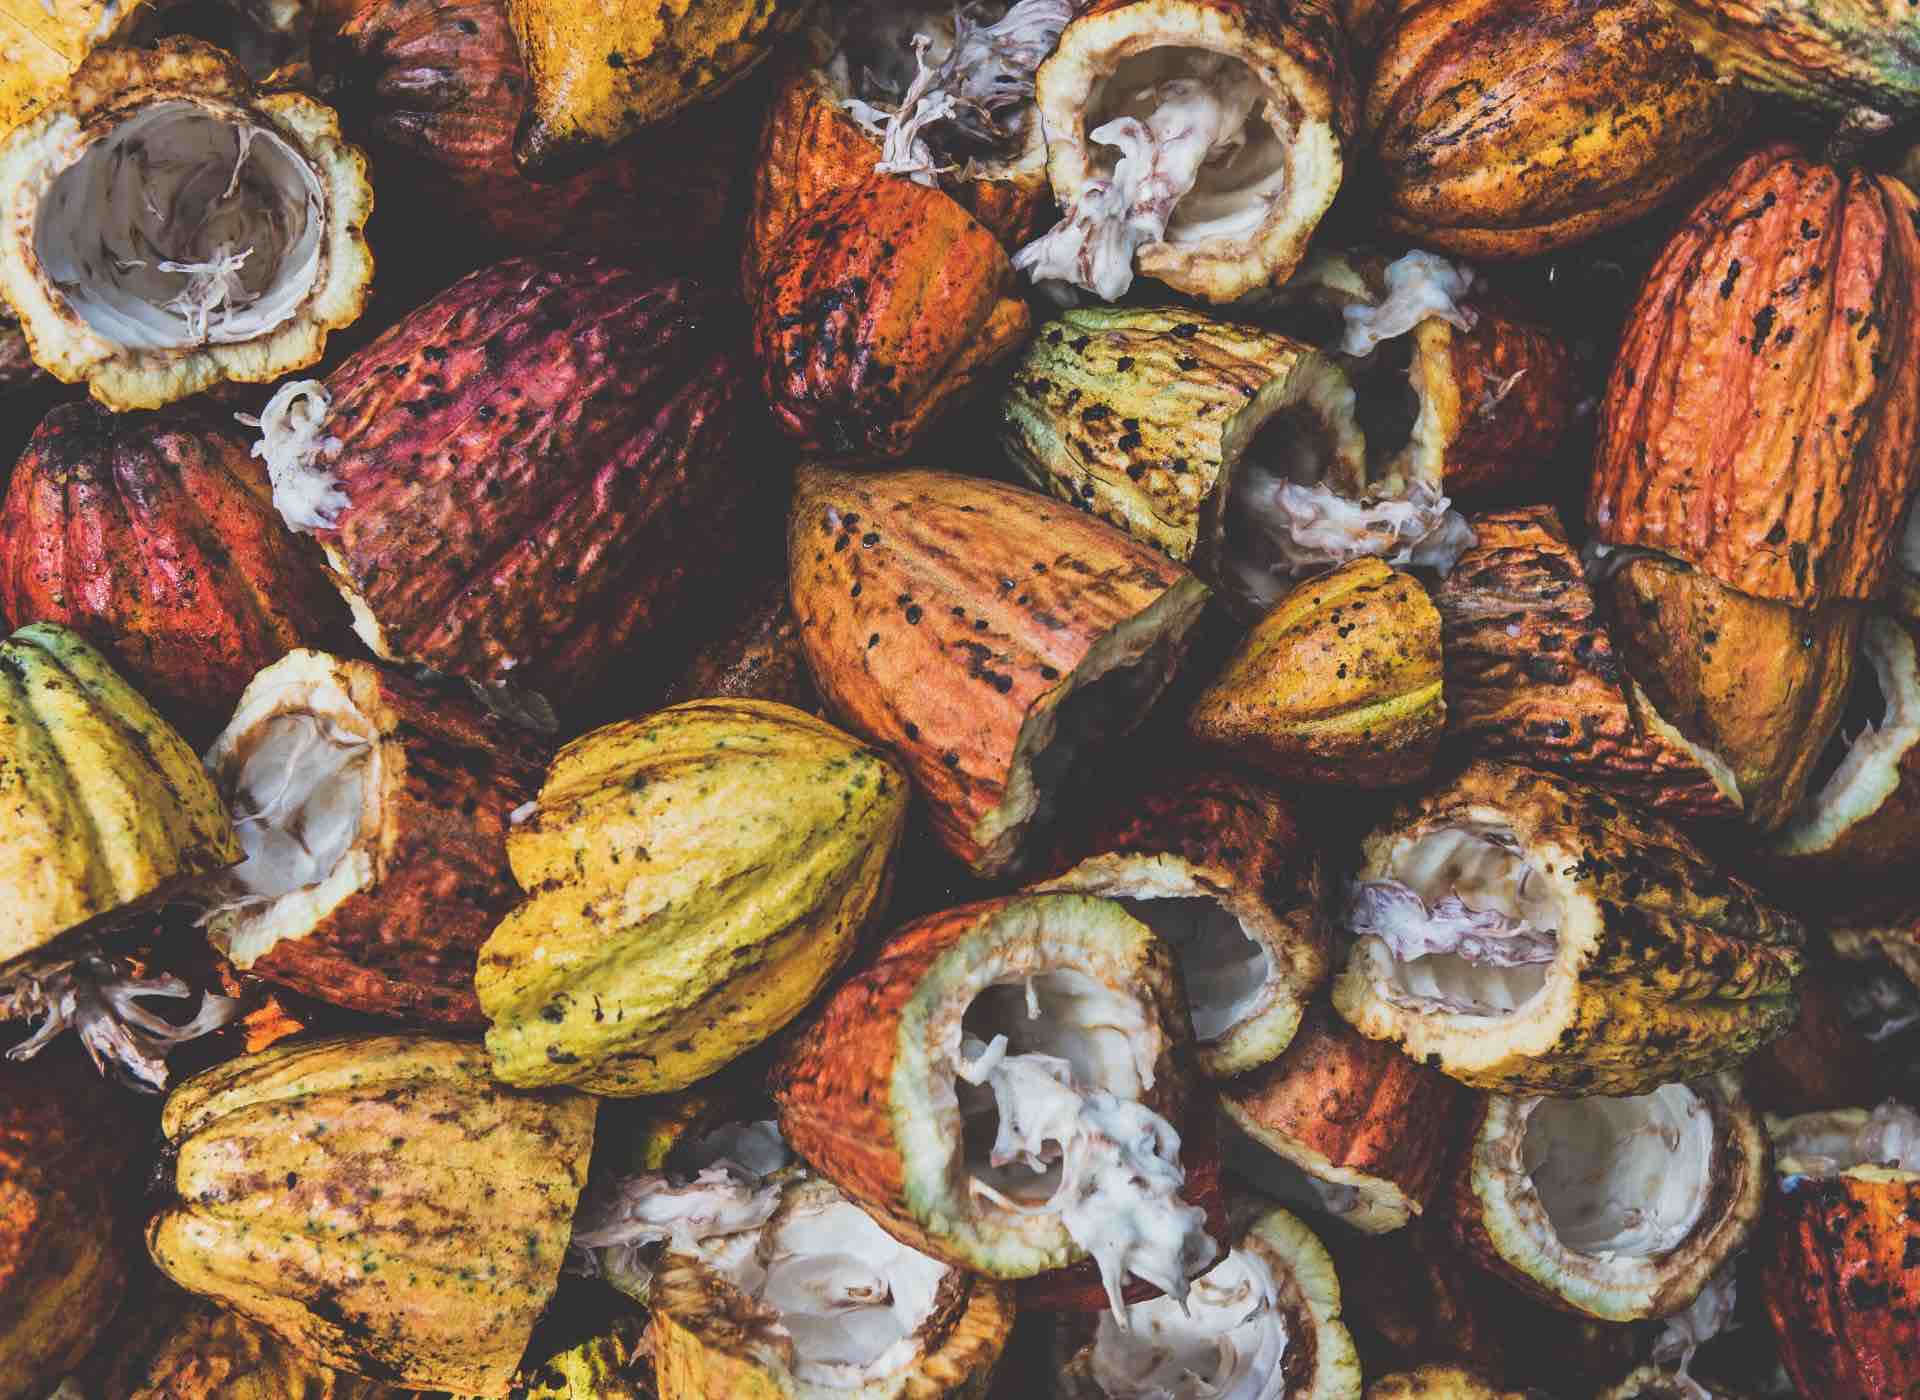 Cocoa waste electricity, waste to power, Ivory Coast, Divo